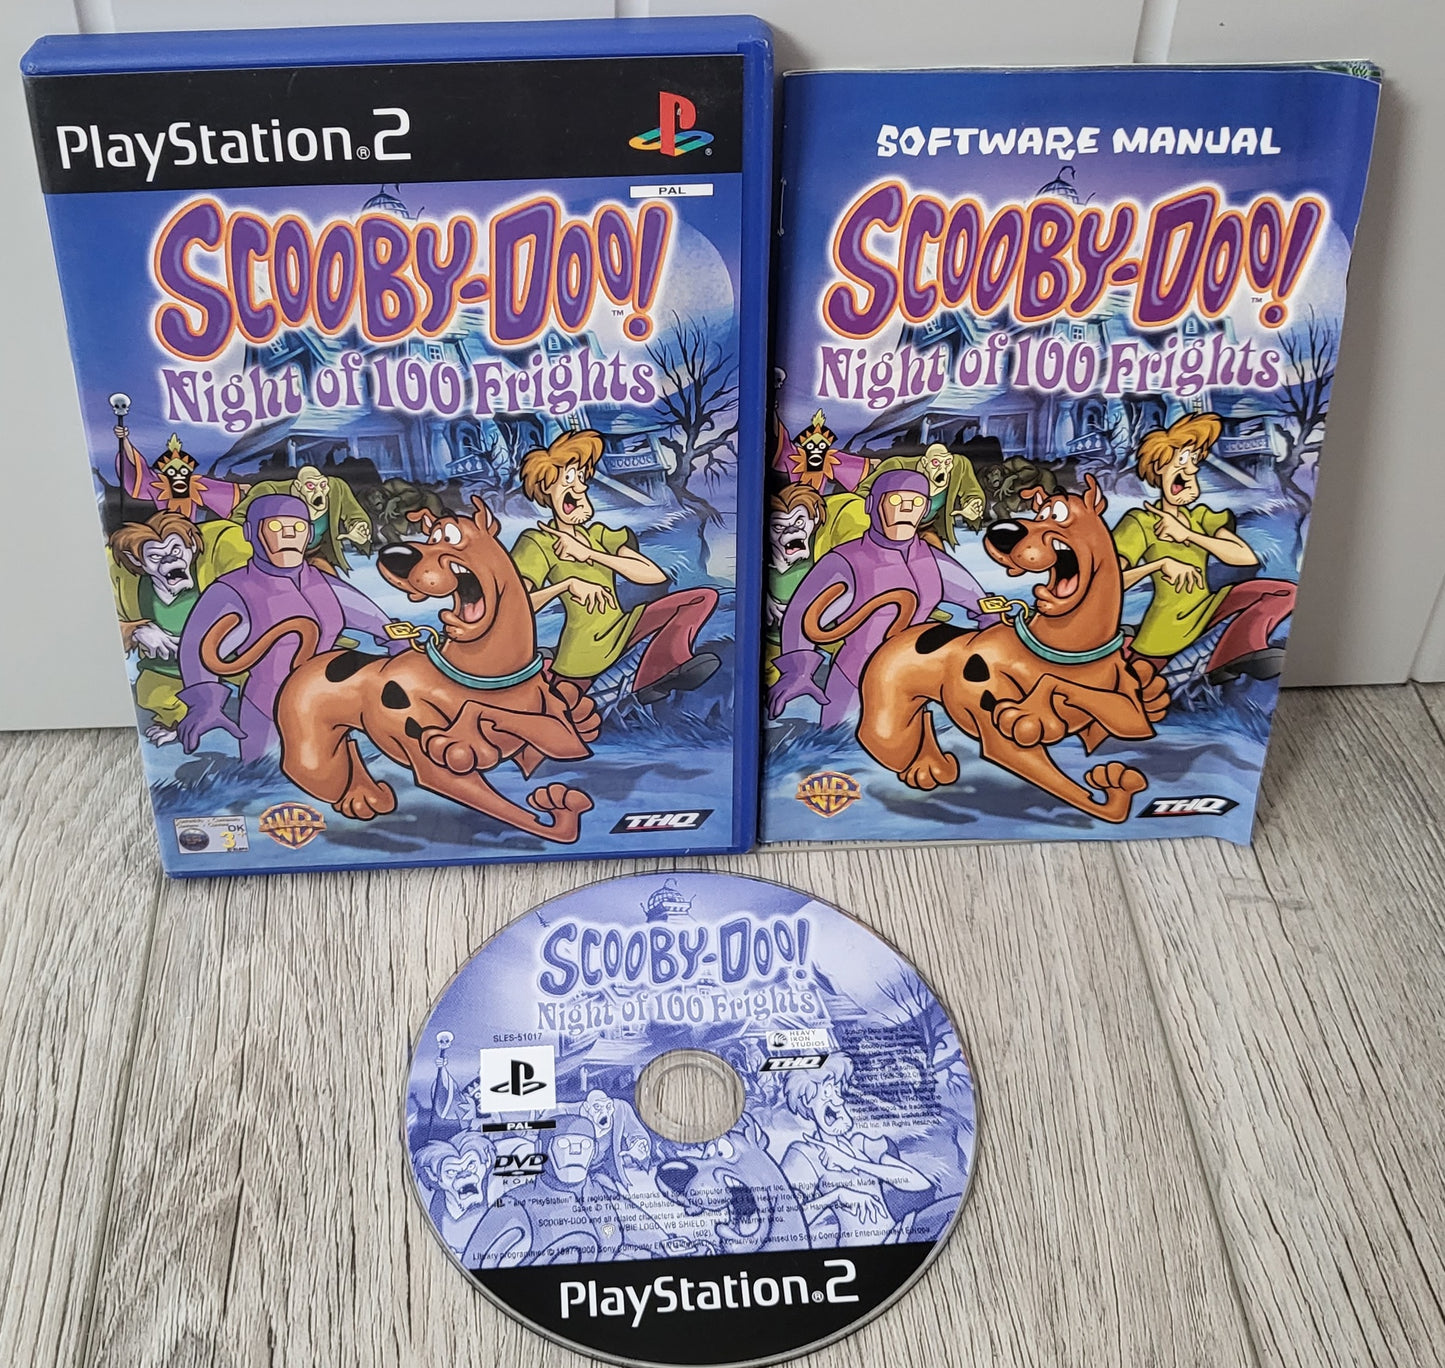 Scooby-Doo Night of 100 Frights Sony Playstation 2 (PS2) Game